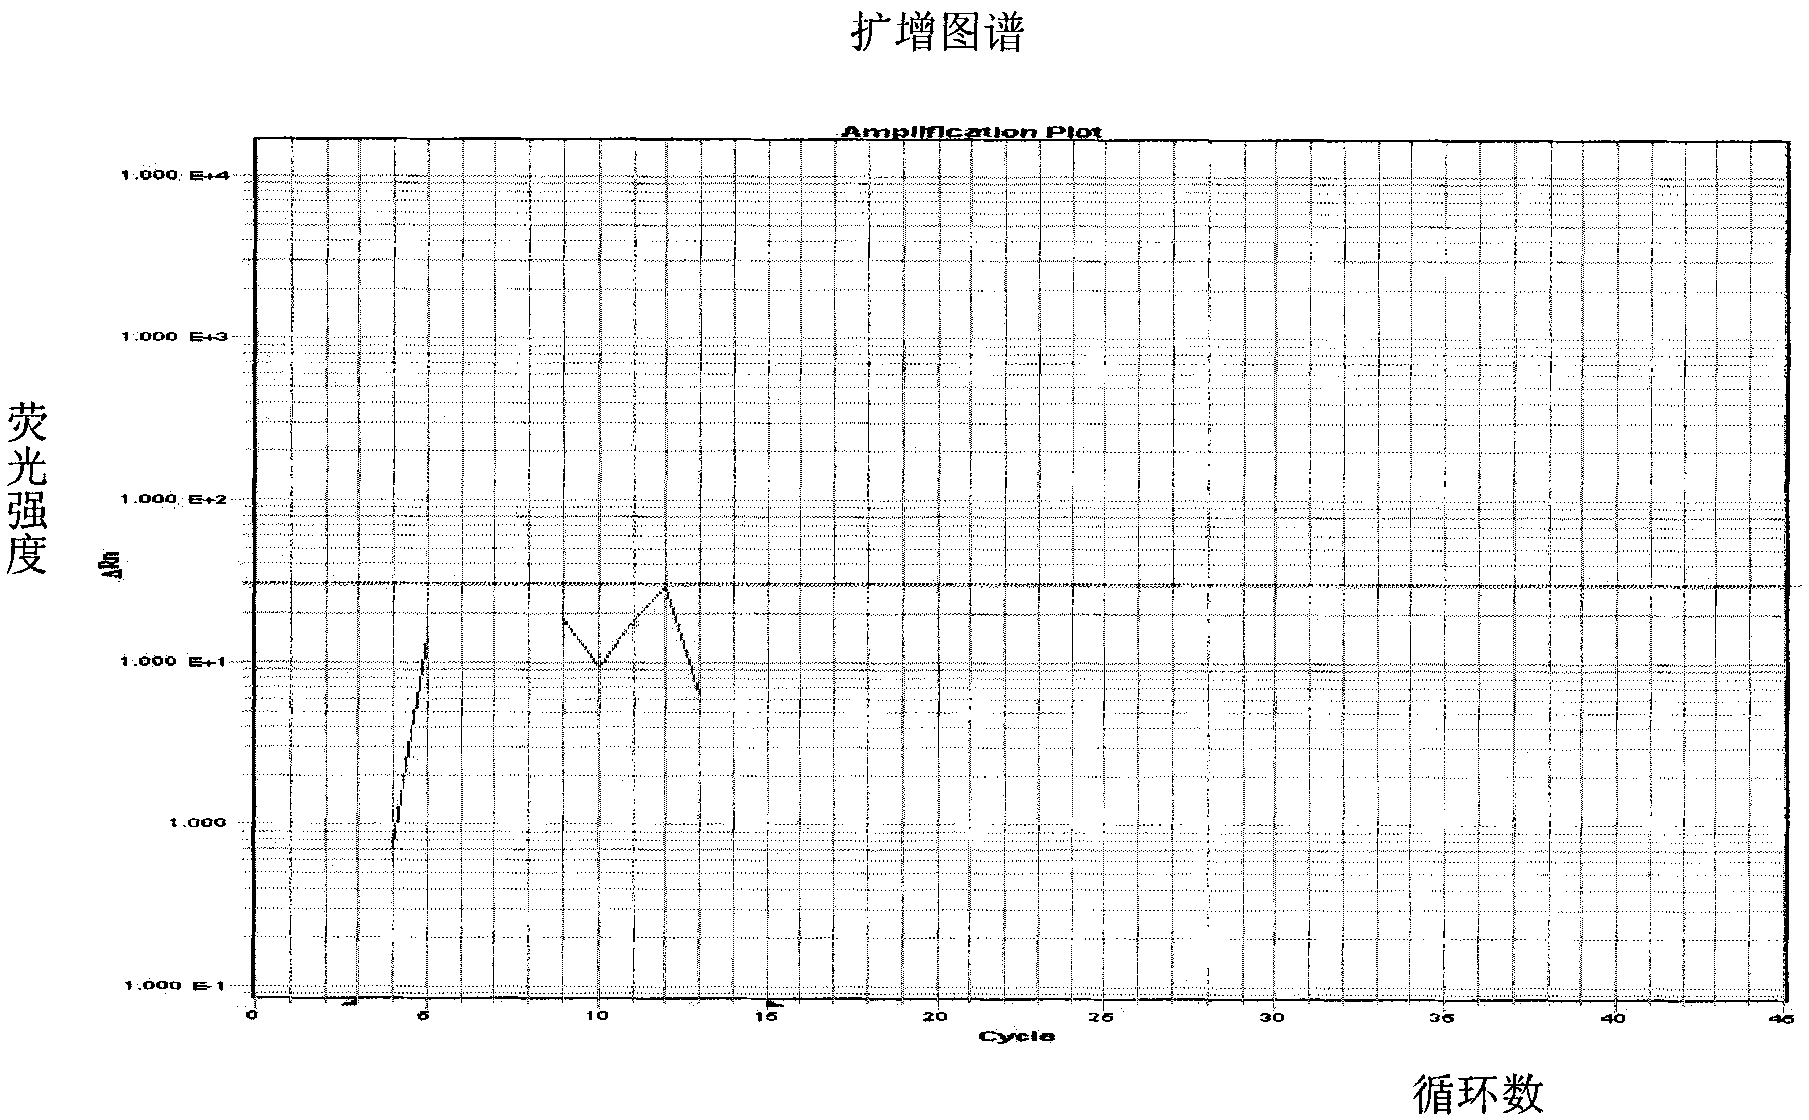 Preparation of kit and method for rapidly detecting carotene components in foods and beverages